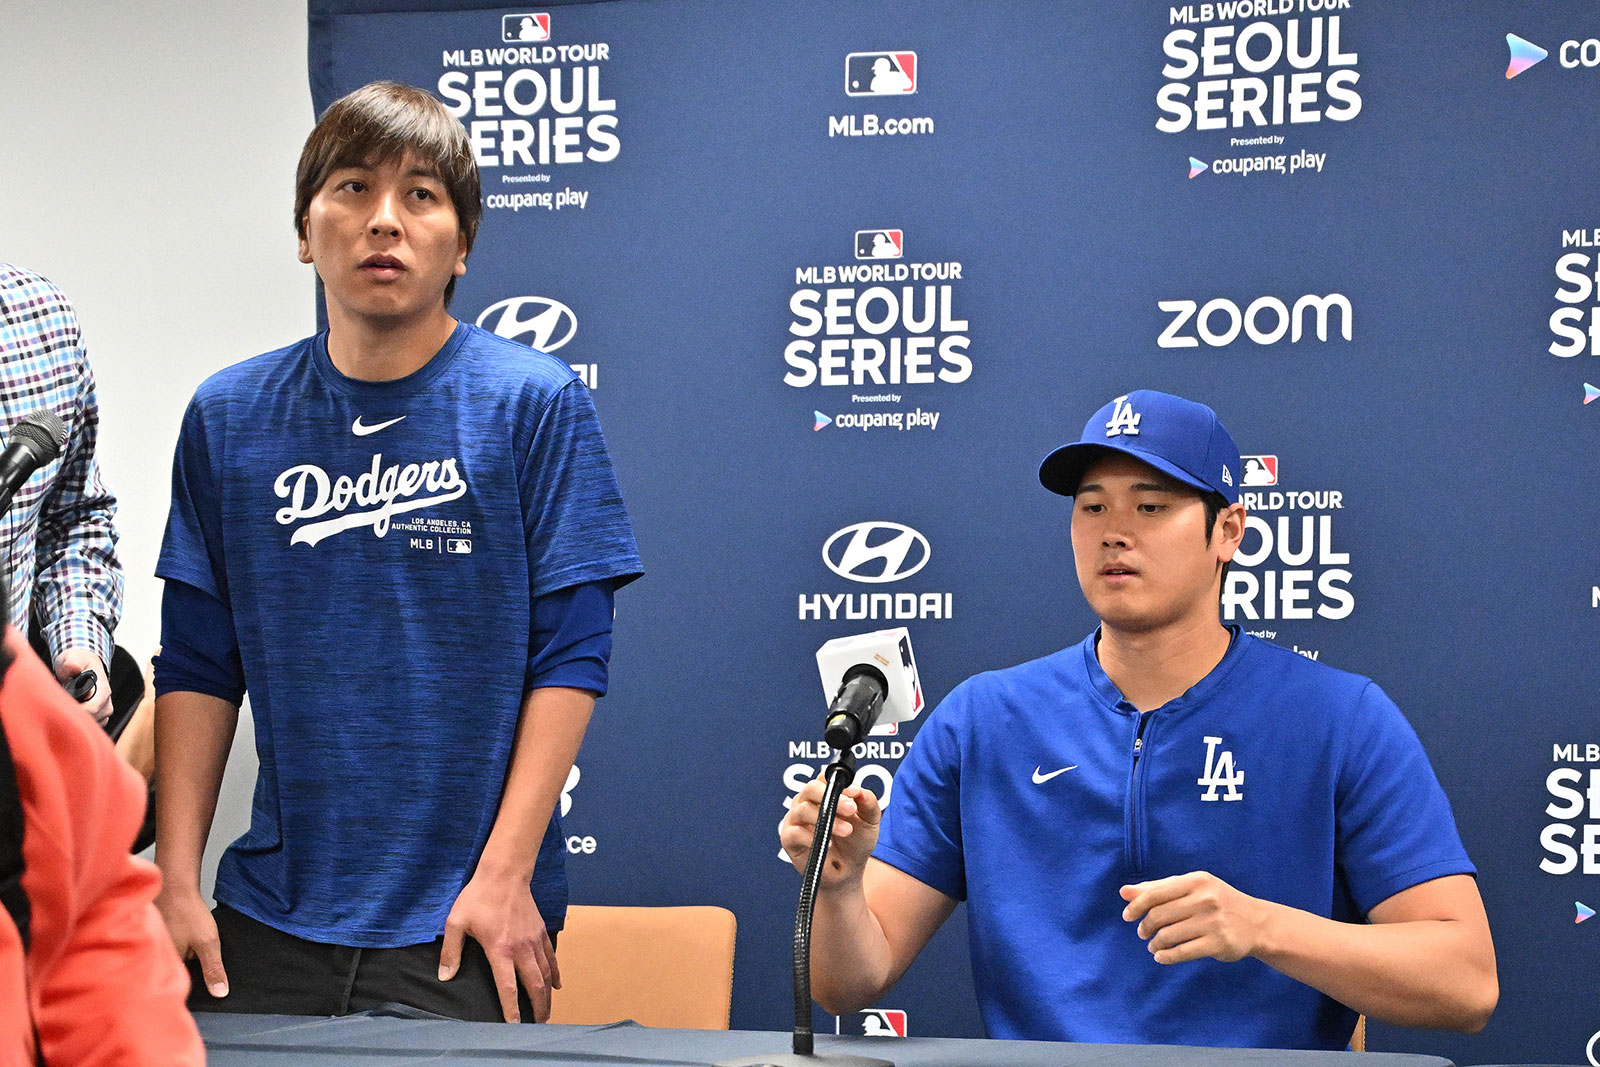 Shohei Ohtani, right, and his interpreter Ippei Mizuhara  attended a press conference at Gocheok Sky Dome in Seoul on March 16.